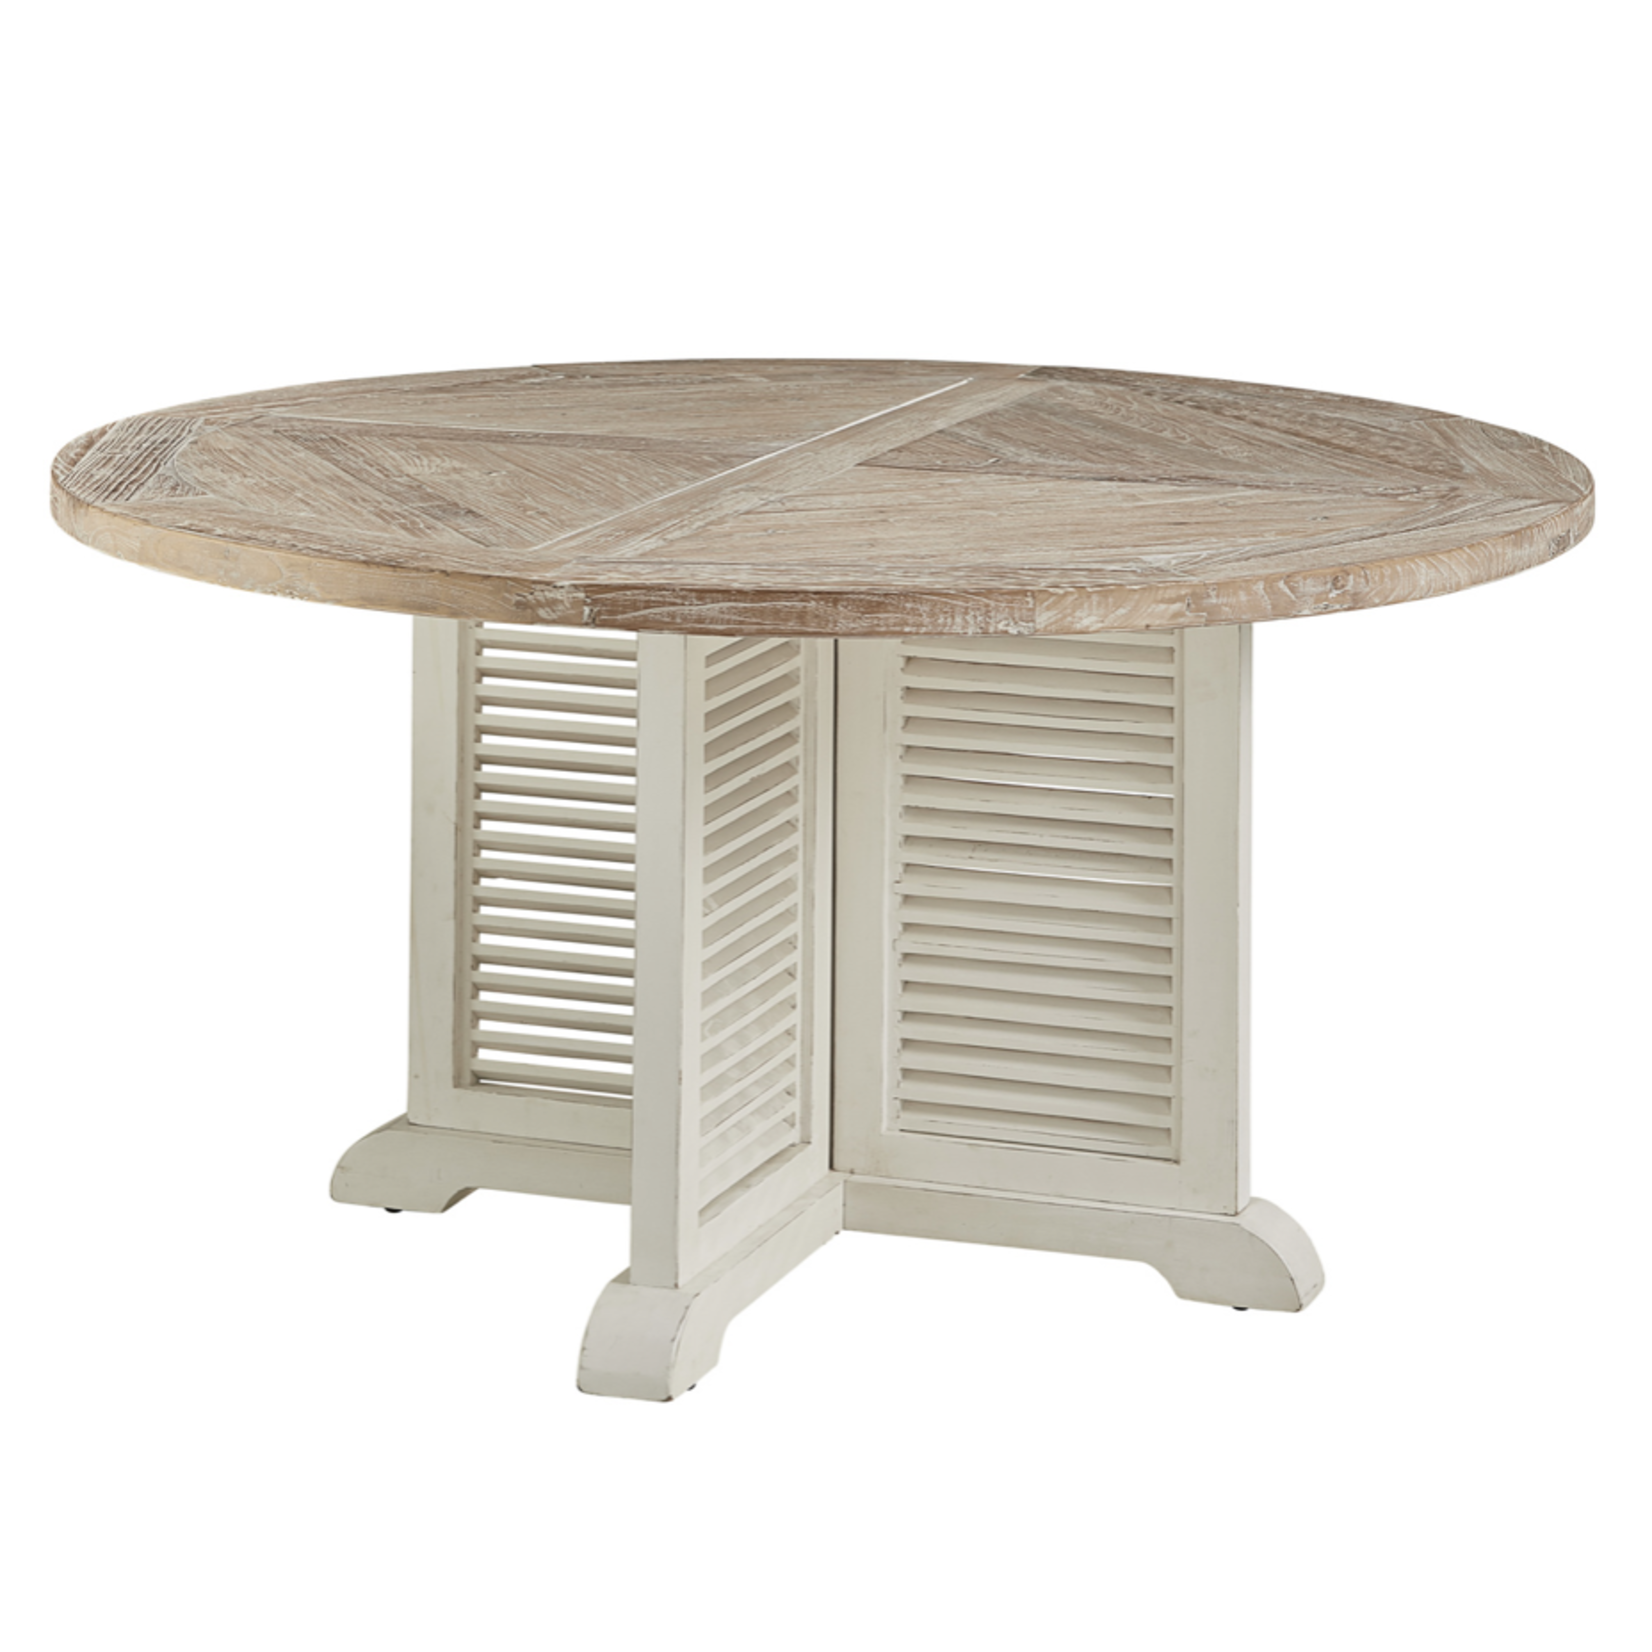 Outside The Box 59" Hatteras Reclaimed Elm Round Dining Table